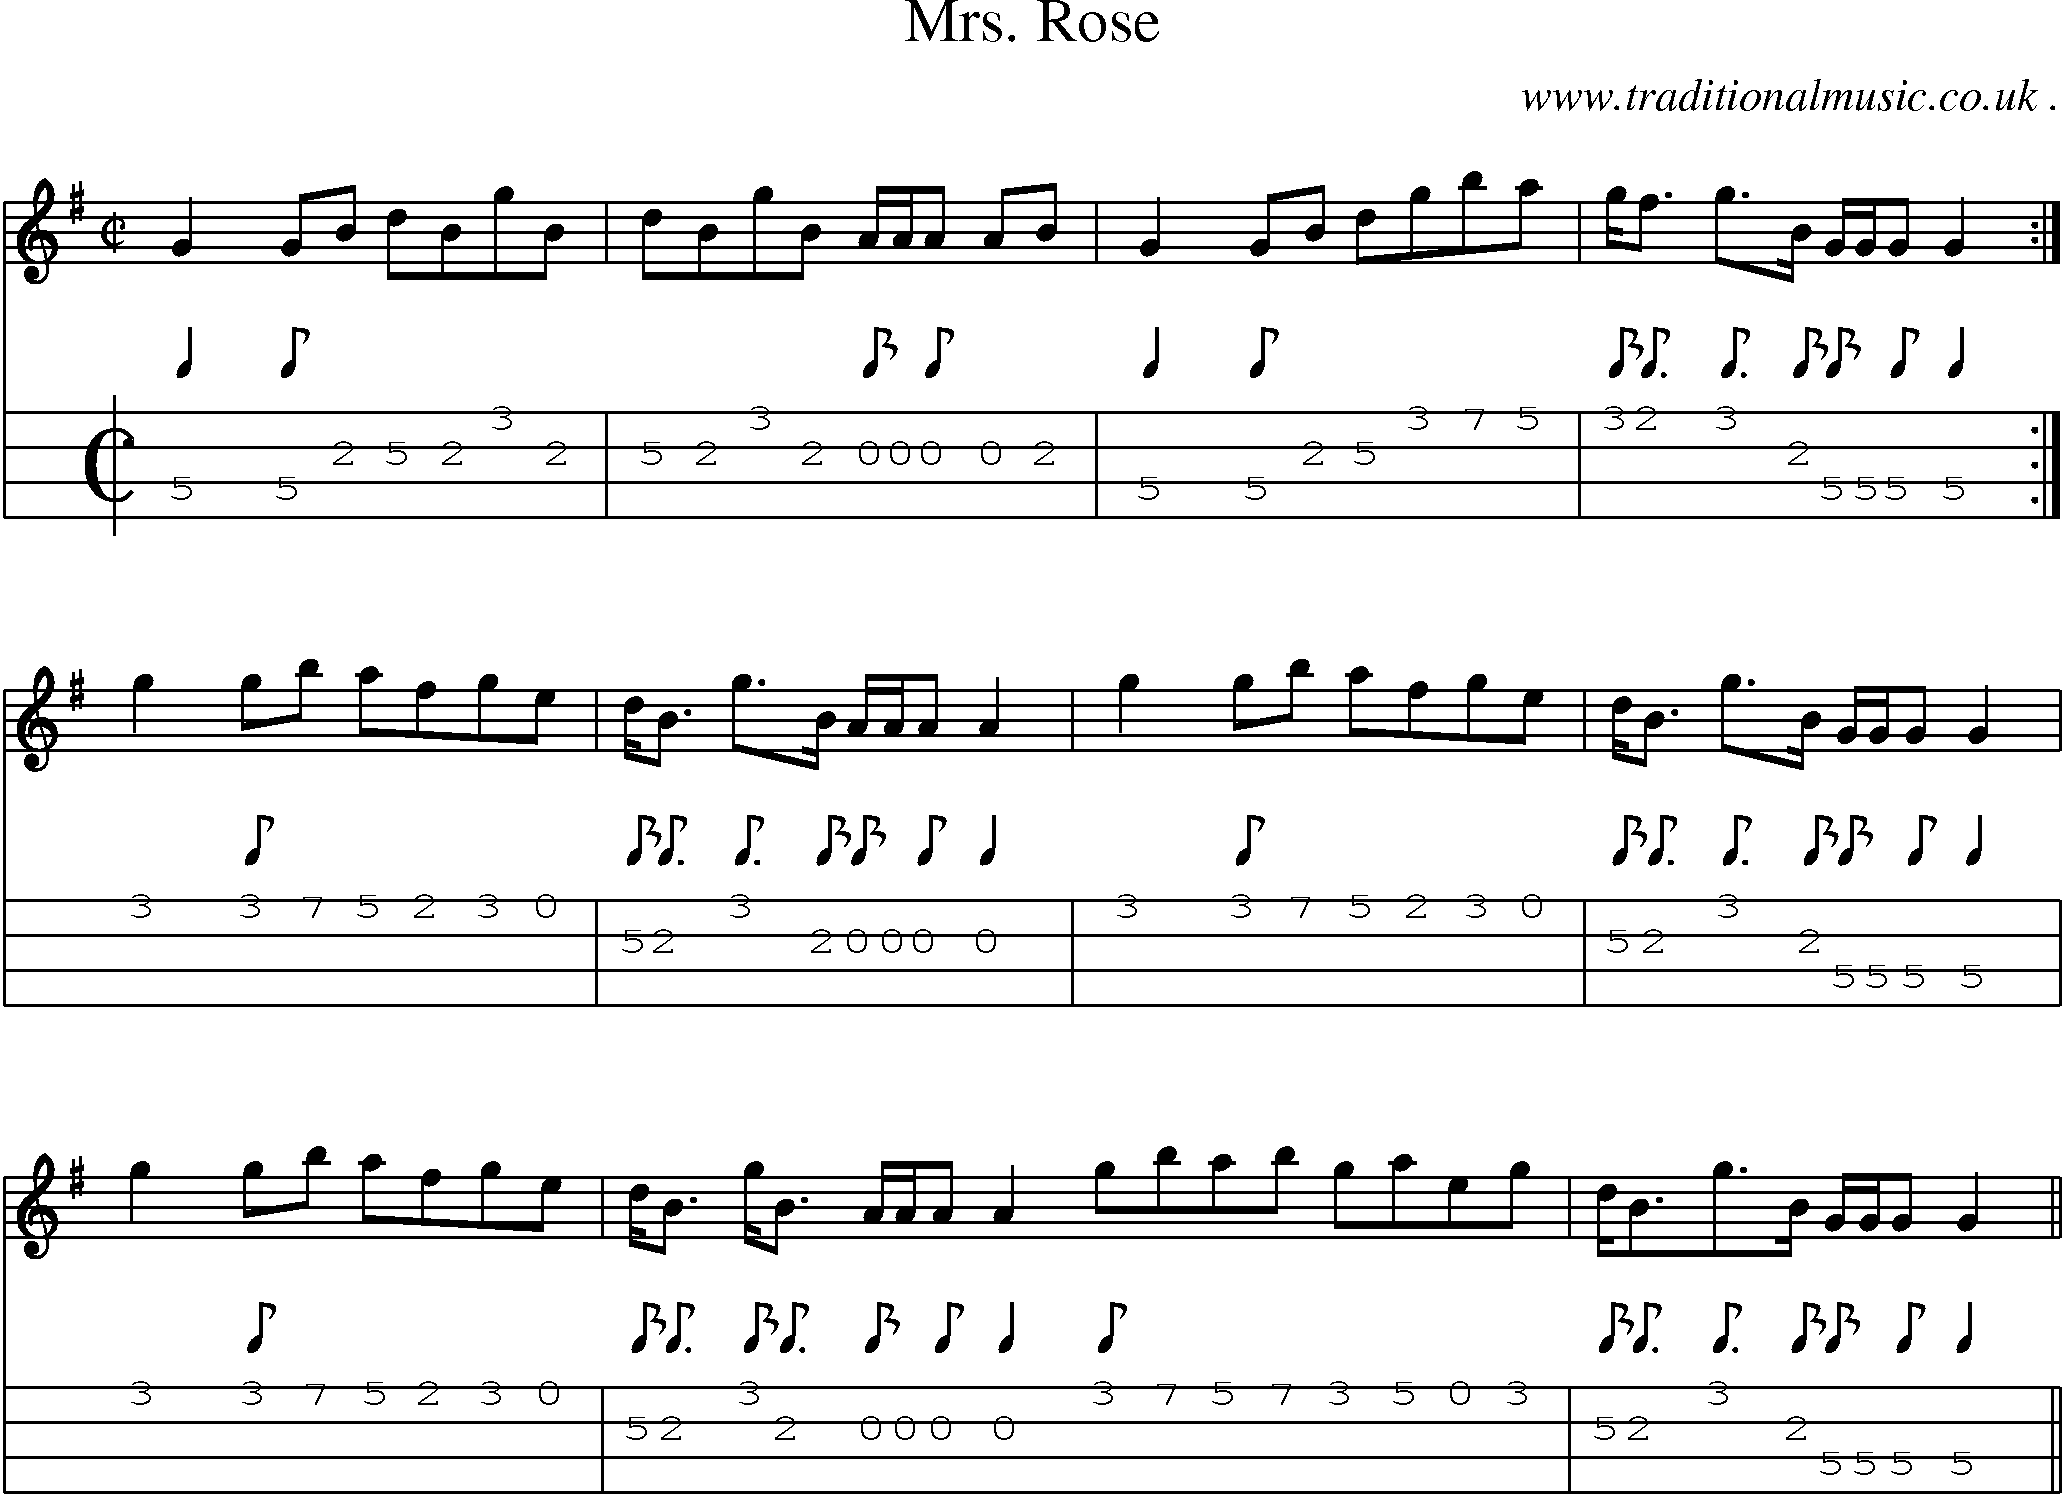 Sheet-music  score, Chords and Mandolin Tabs for Mrs Rose